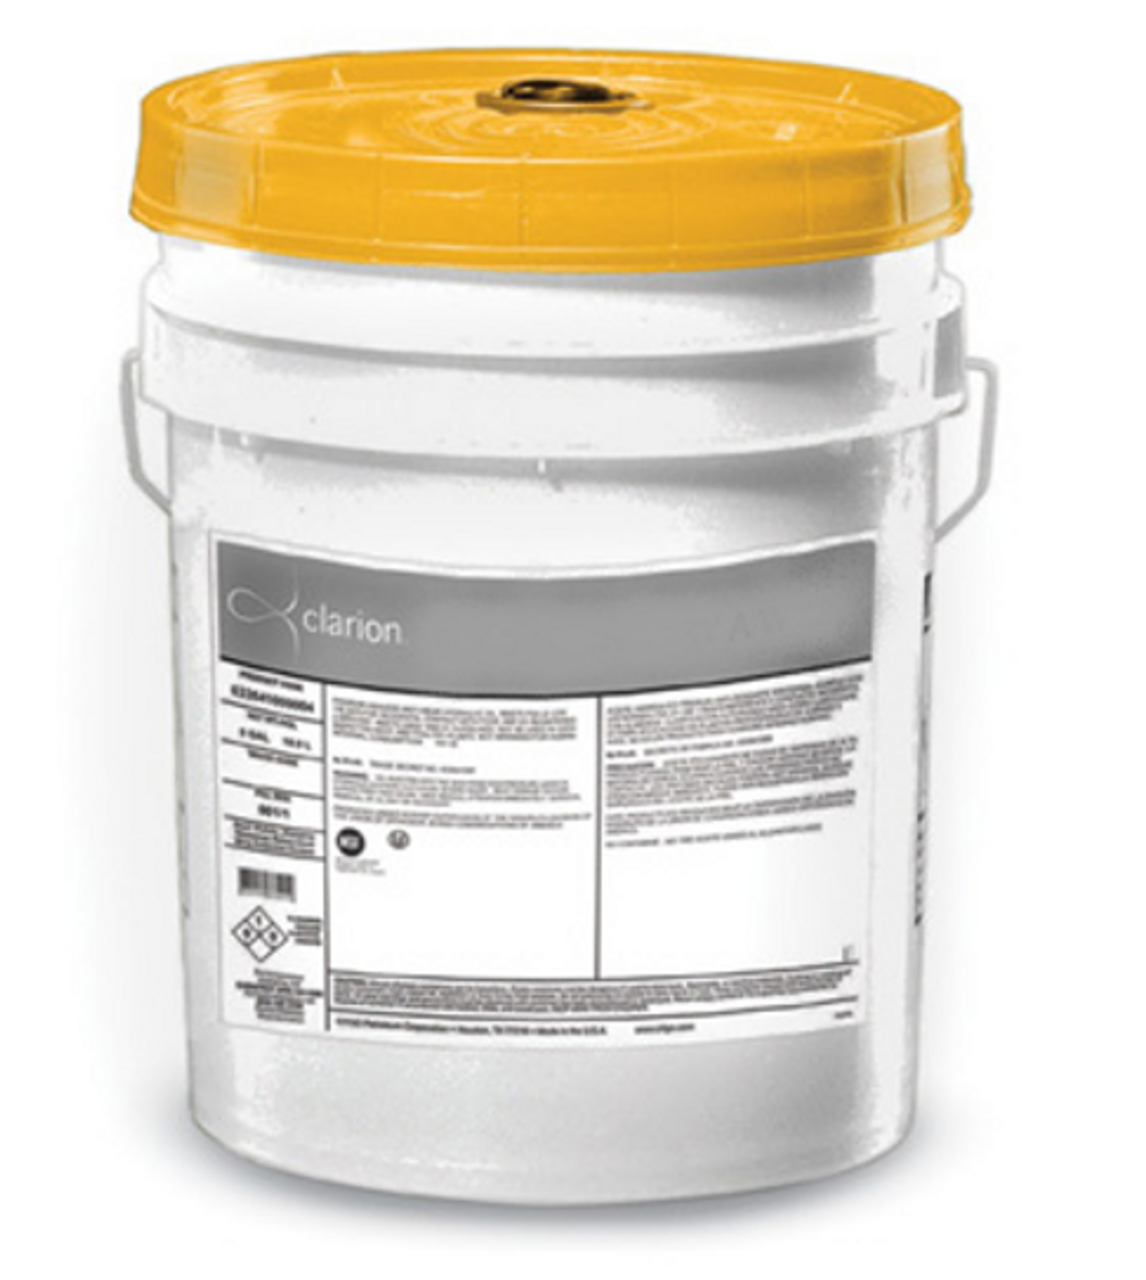 Clarion Food Machine Grease #2 - 5 lb Pail